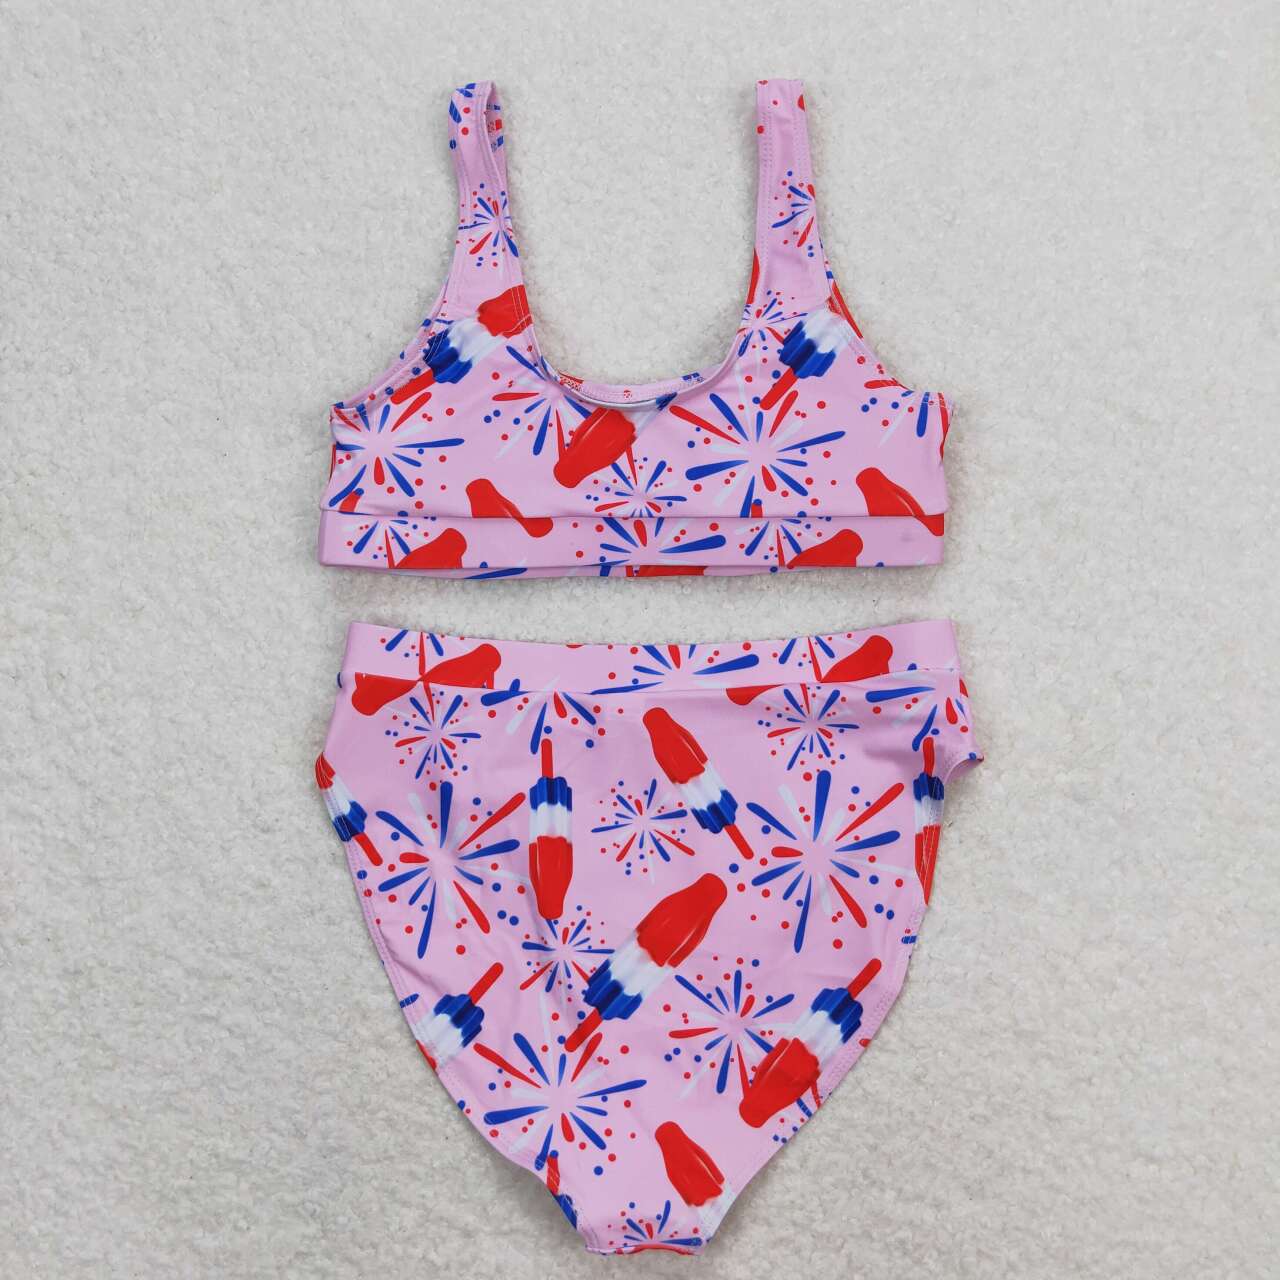 S0334 RTS adult clothes Adult mom 4th of July patriotic print Summer Swimsuit adult bikini 11